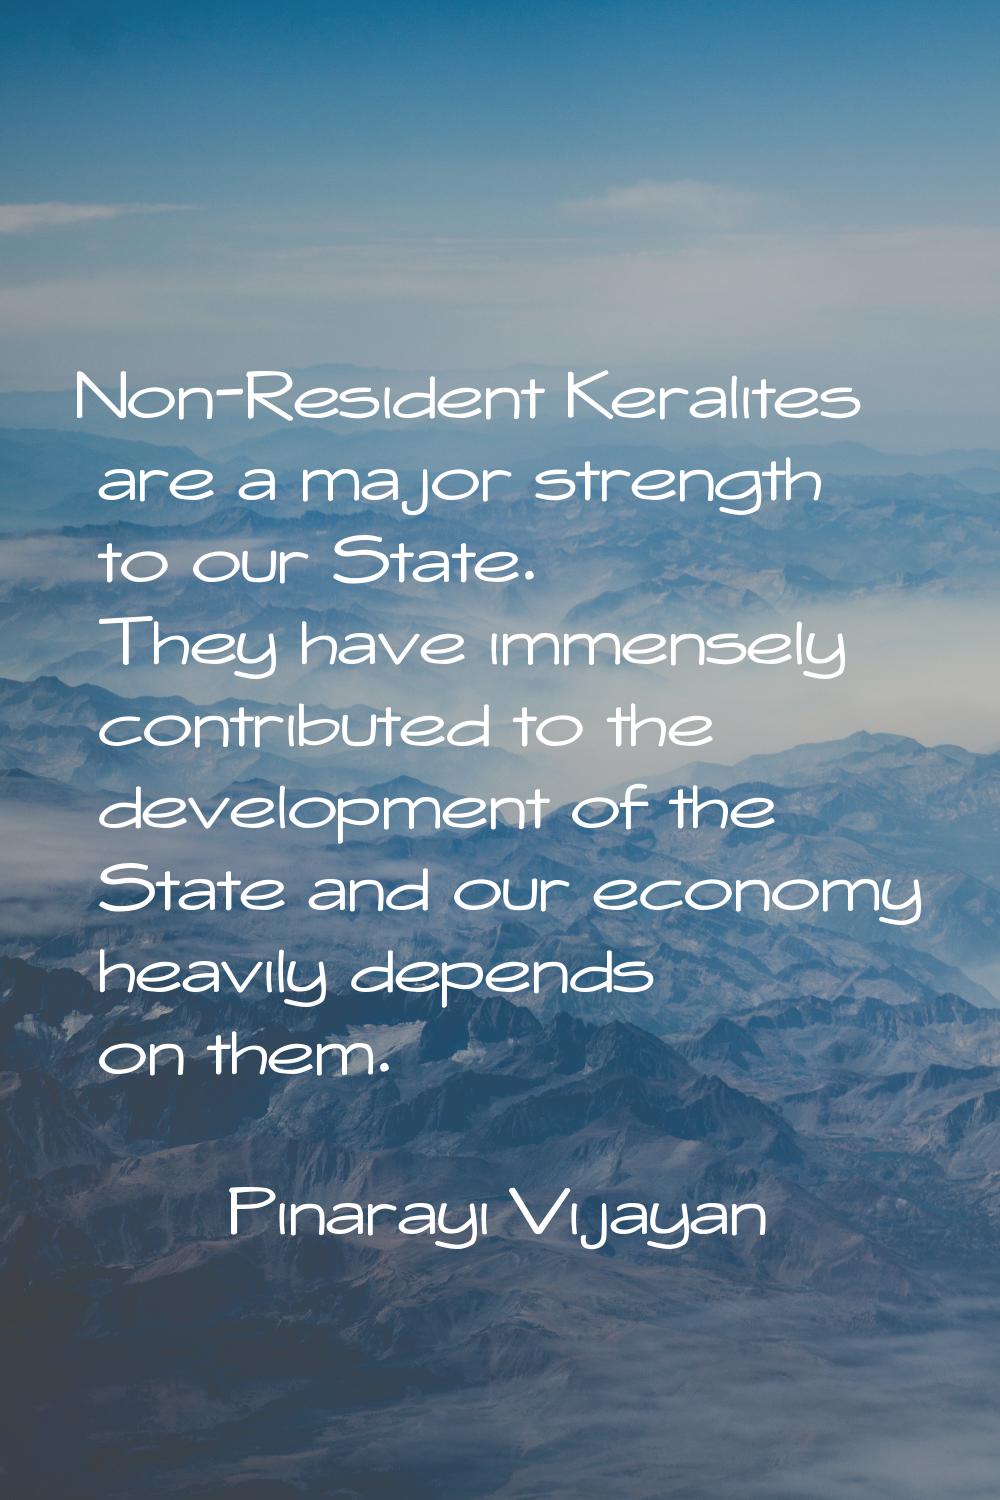 Non-Resident Keralites are a major strength to our State. They have immensely contributed to the de